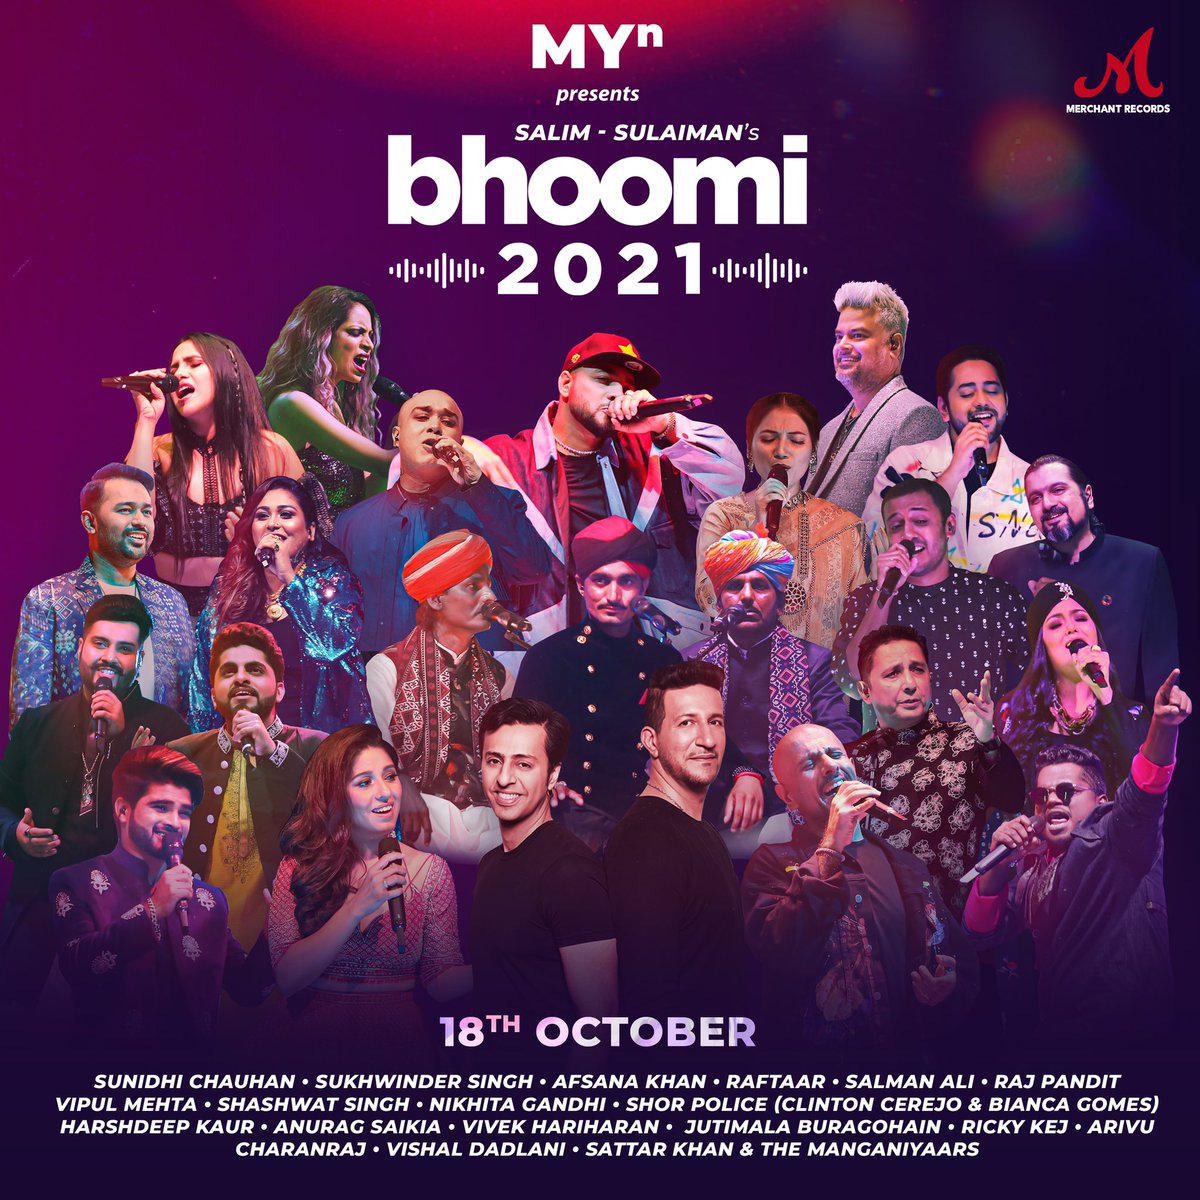 This is where I have been #Laapata for all these months! So honoured to be a part of #Bhoomi21 - even bigger and more magical than last year! ✨

Swipe to see the mammoth that this movement is - it all begins on 18th October 2021 🗓

#SalimSulaiman #MerchantRecords #MYn